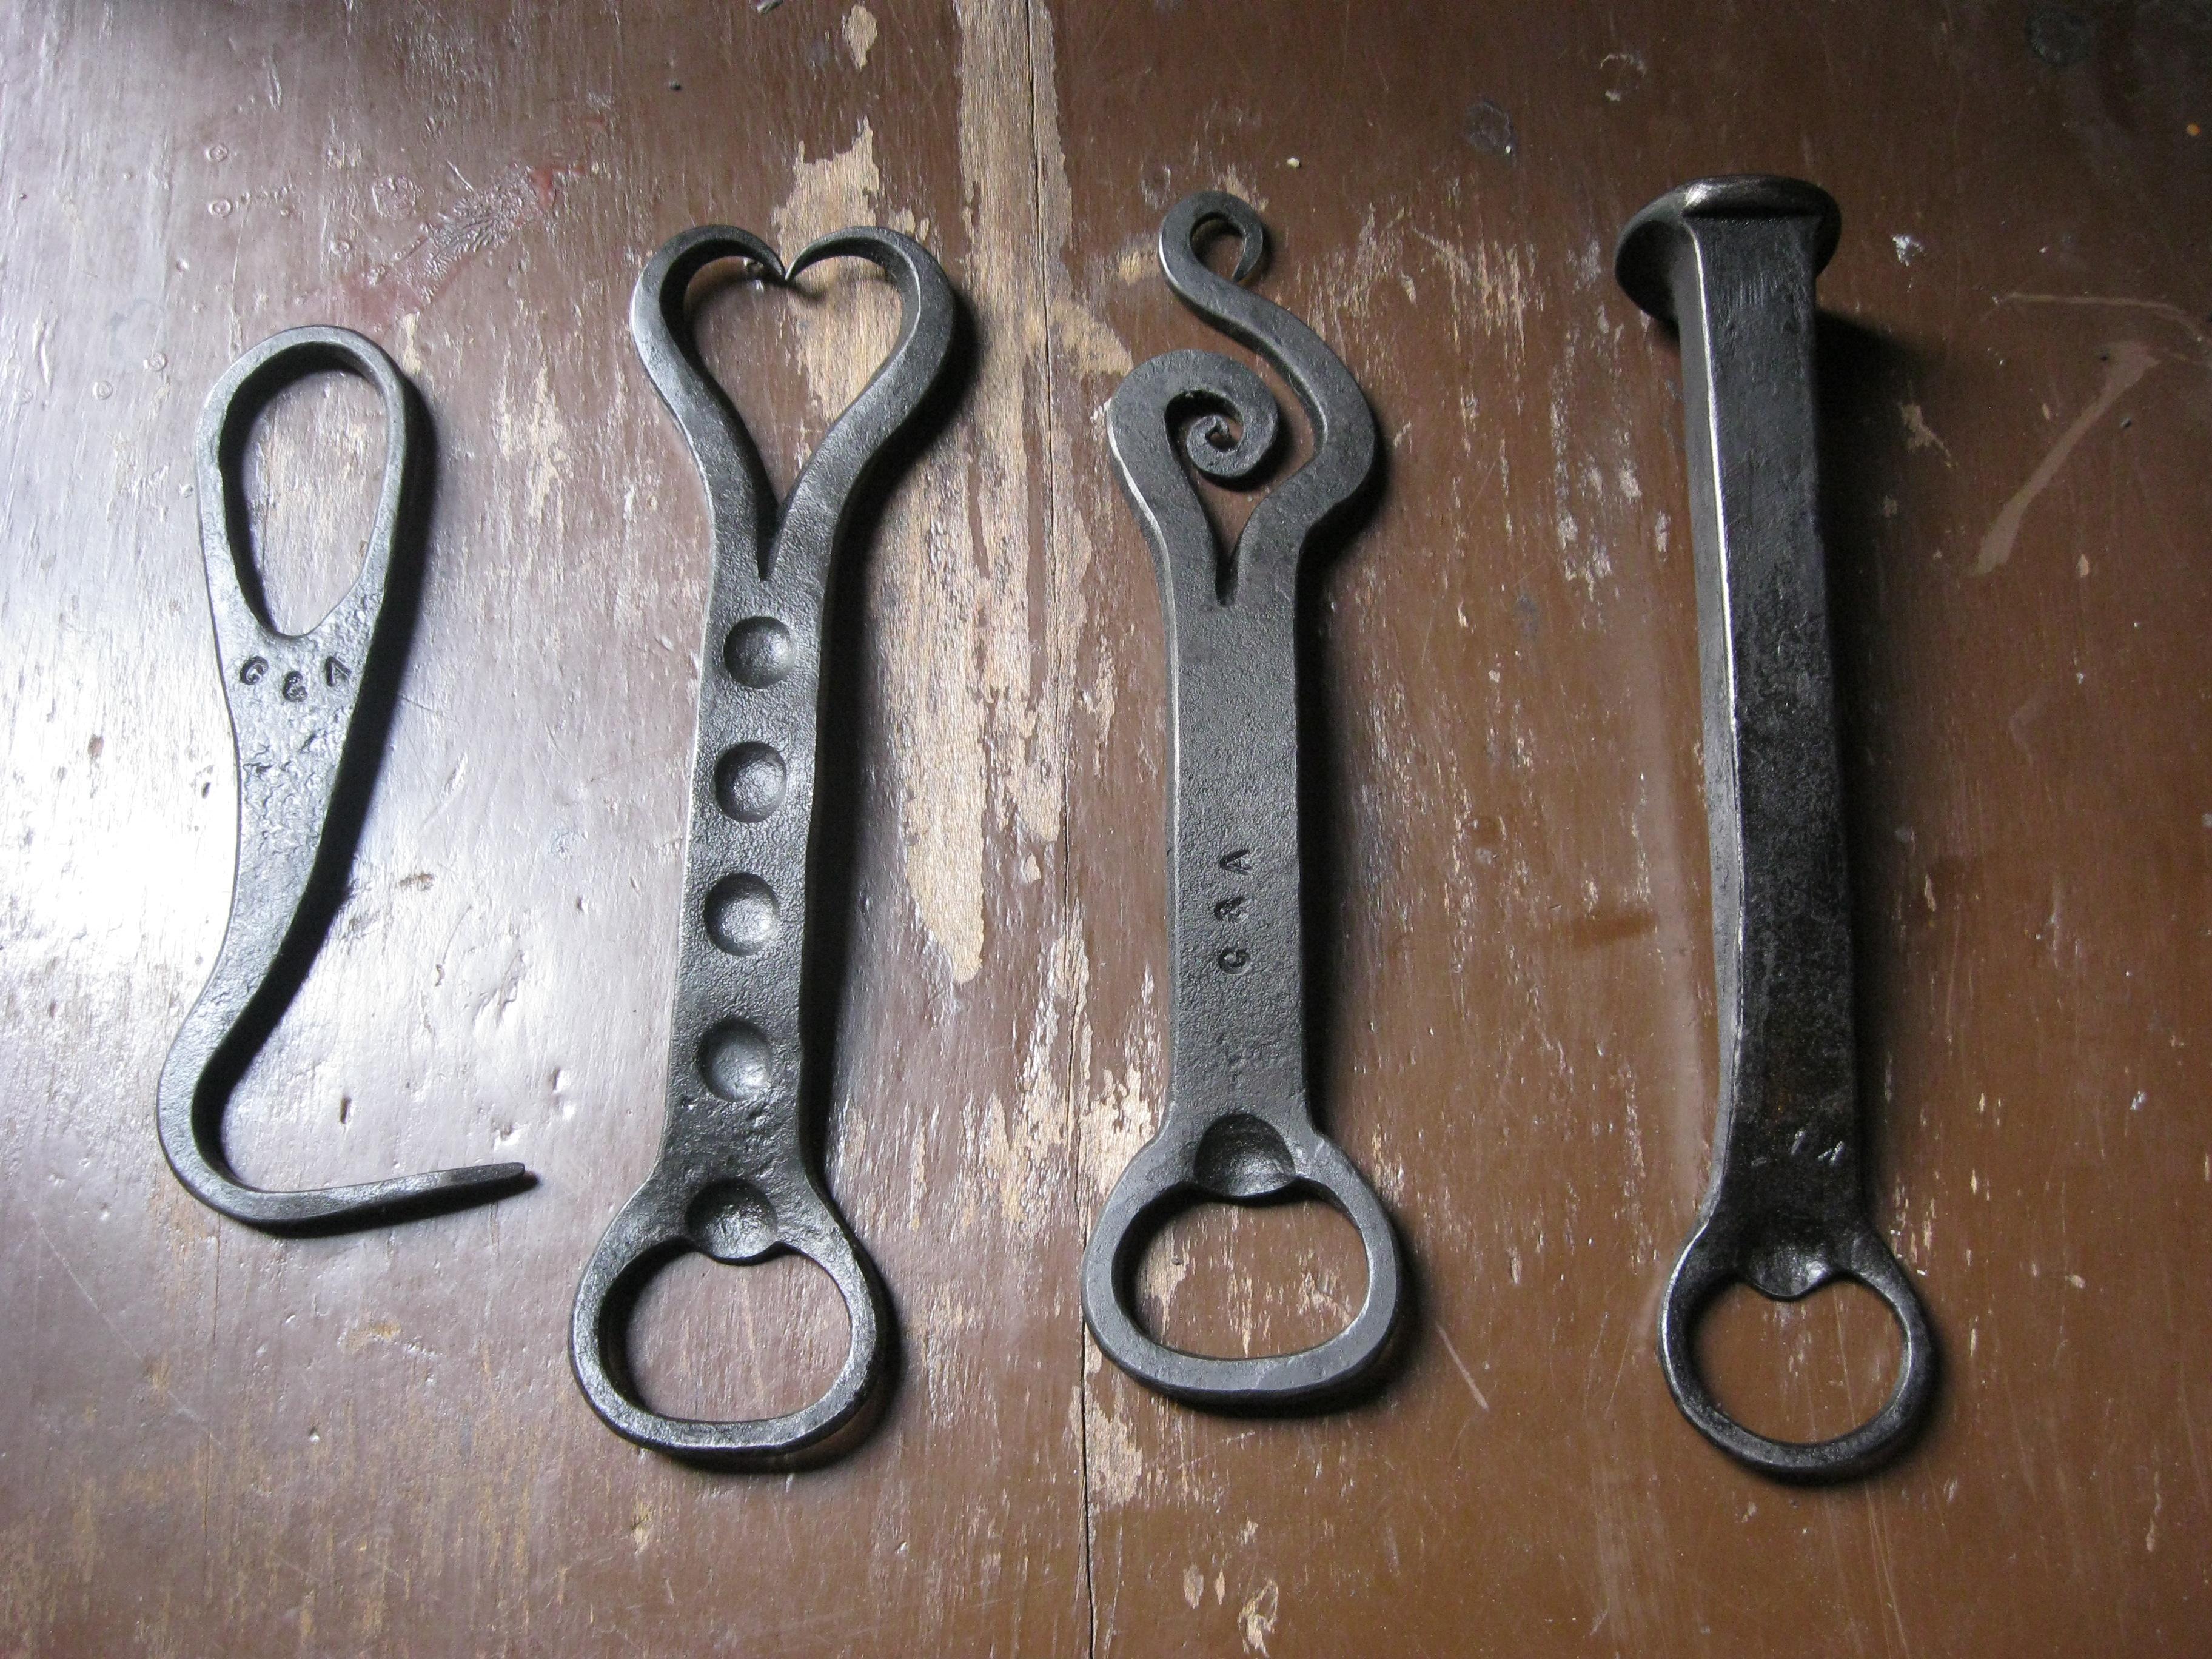 started making bottle openers - Member Projects - I Forge Iron